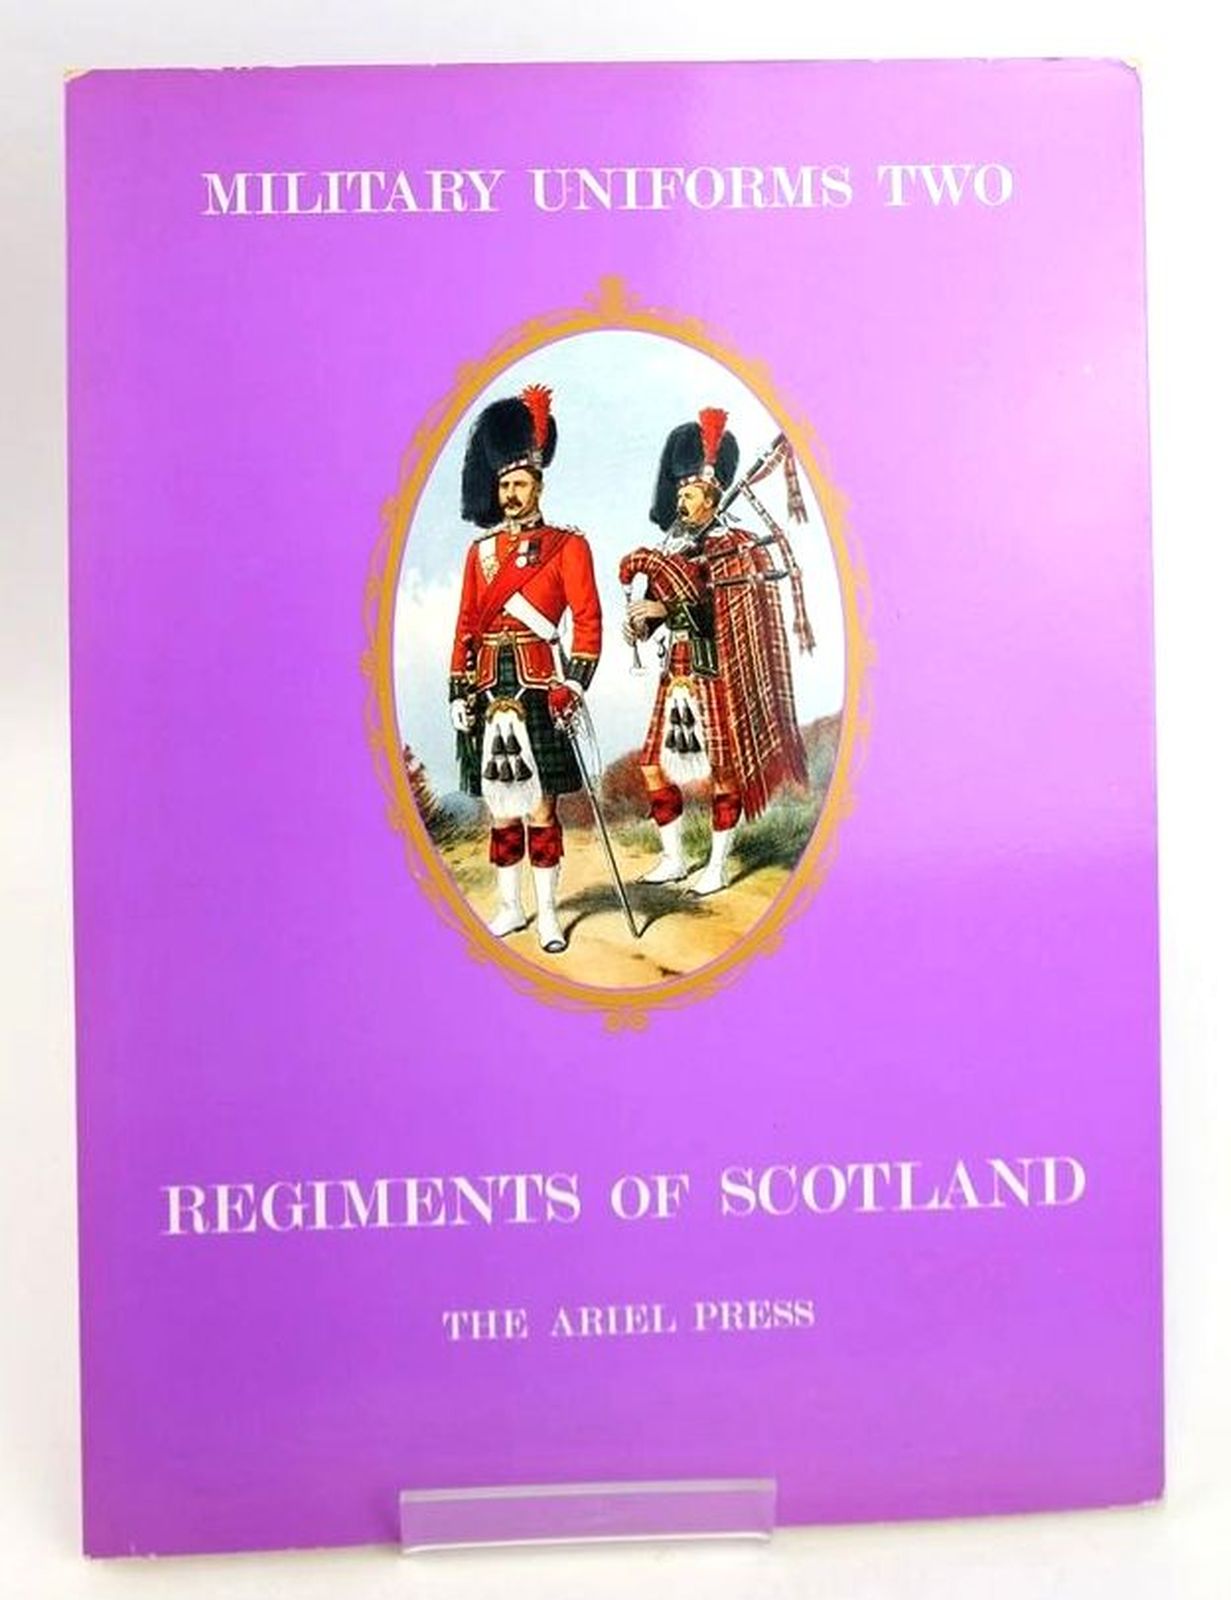 Photo of MILITARY UNIFORMS II: REGIMENTS OF SCOTLAND written by Carman, W.Y. illustrated by Simkin, Richard published by The Ariel Press (STOCK CODE: 1819989)  for sale by Stella & Rose's Books